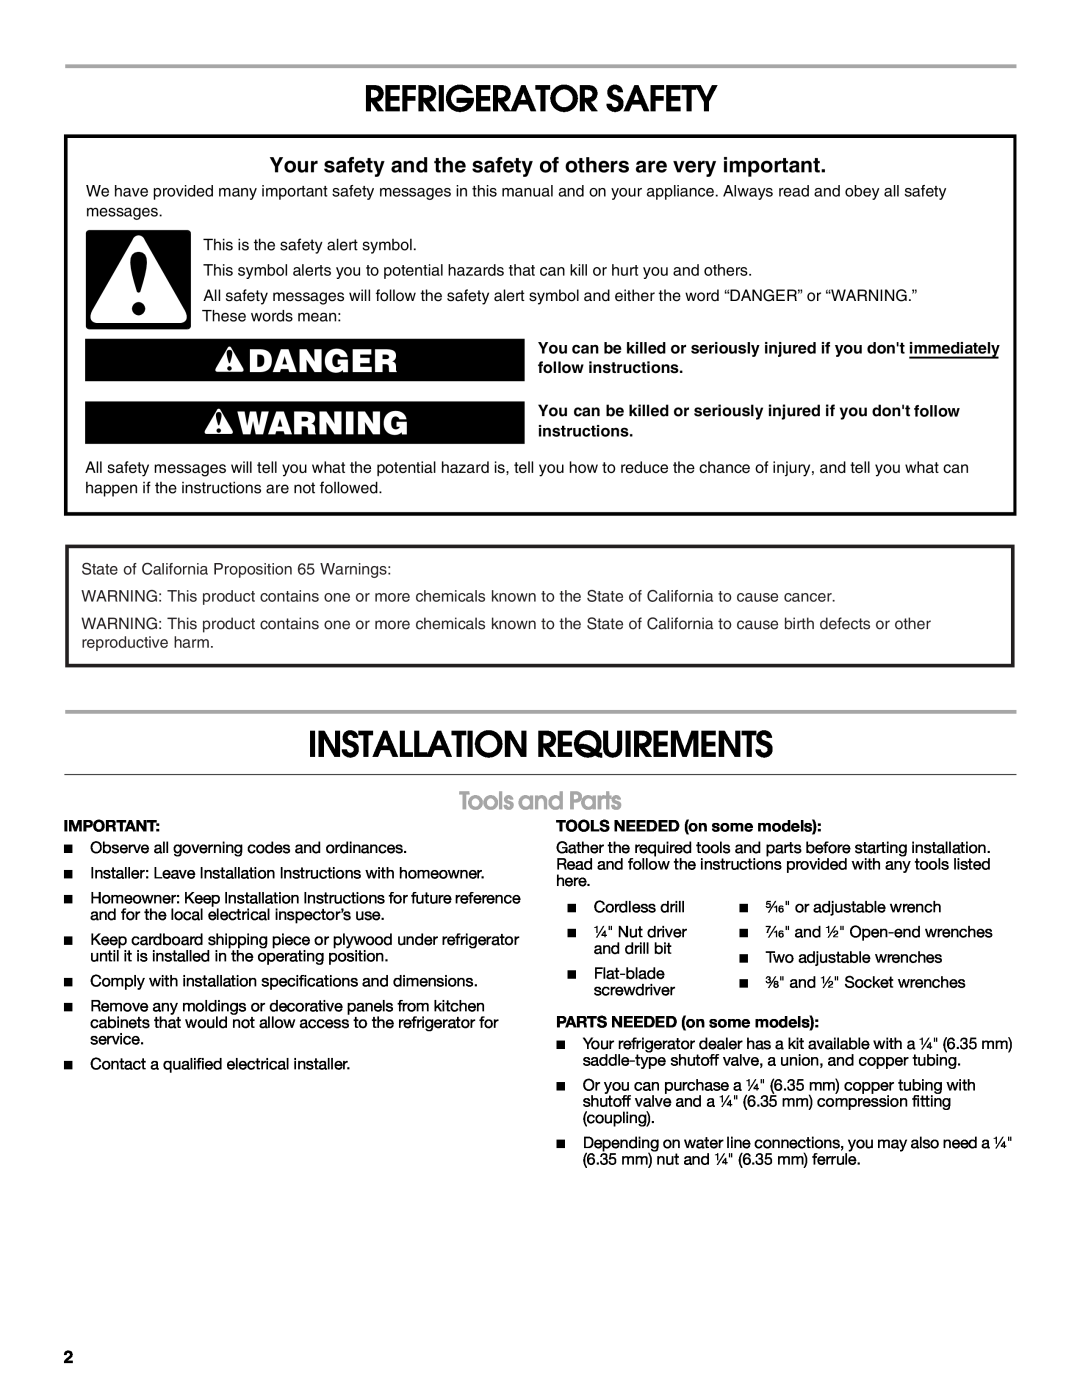 Whirlpool W10168334B installation instructions Refrigerator Safety, Installation Requirements, Danger, Tools and Parts 